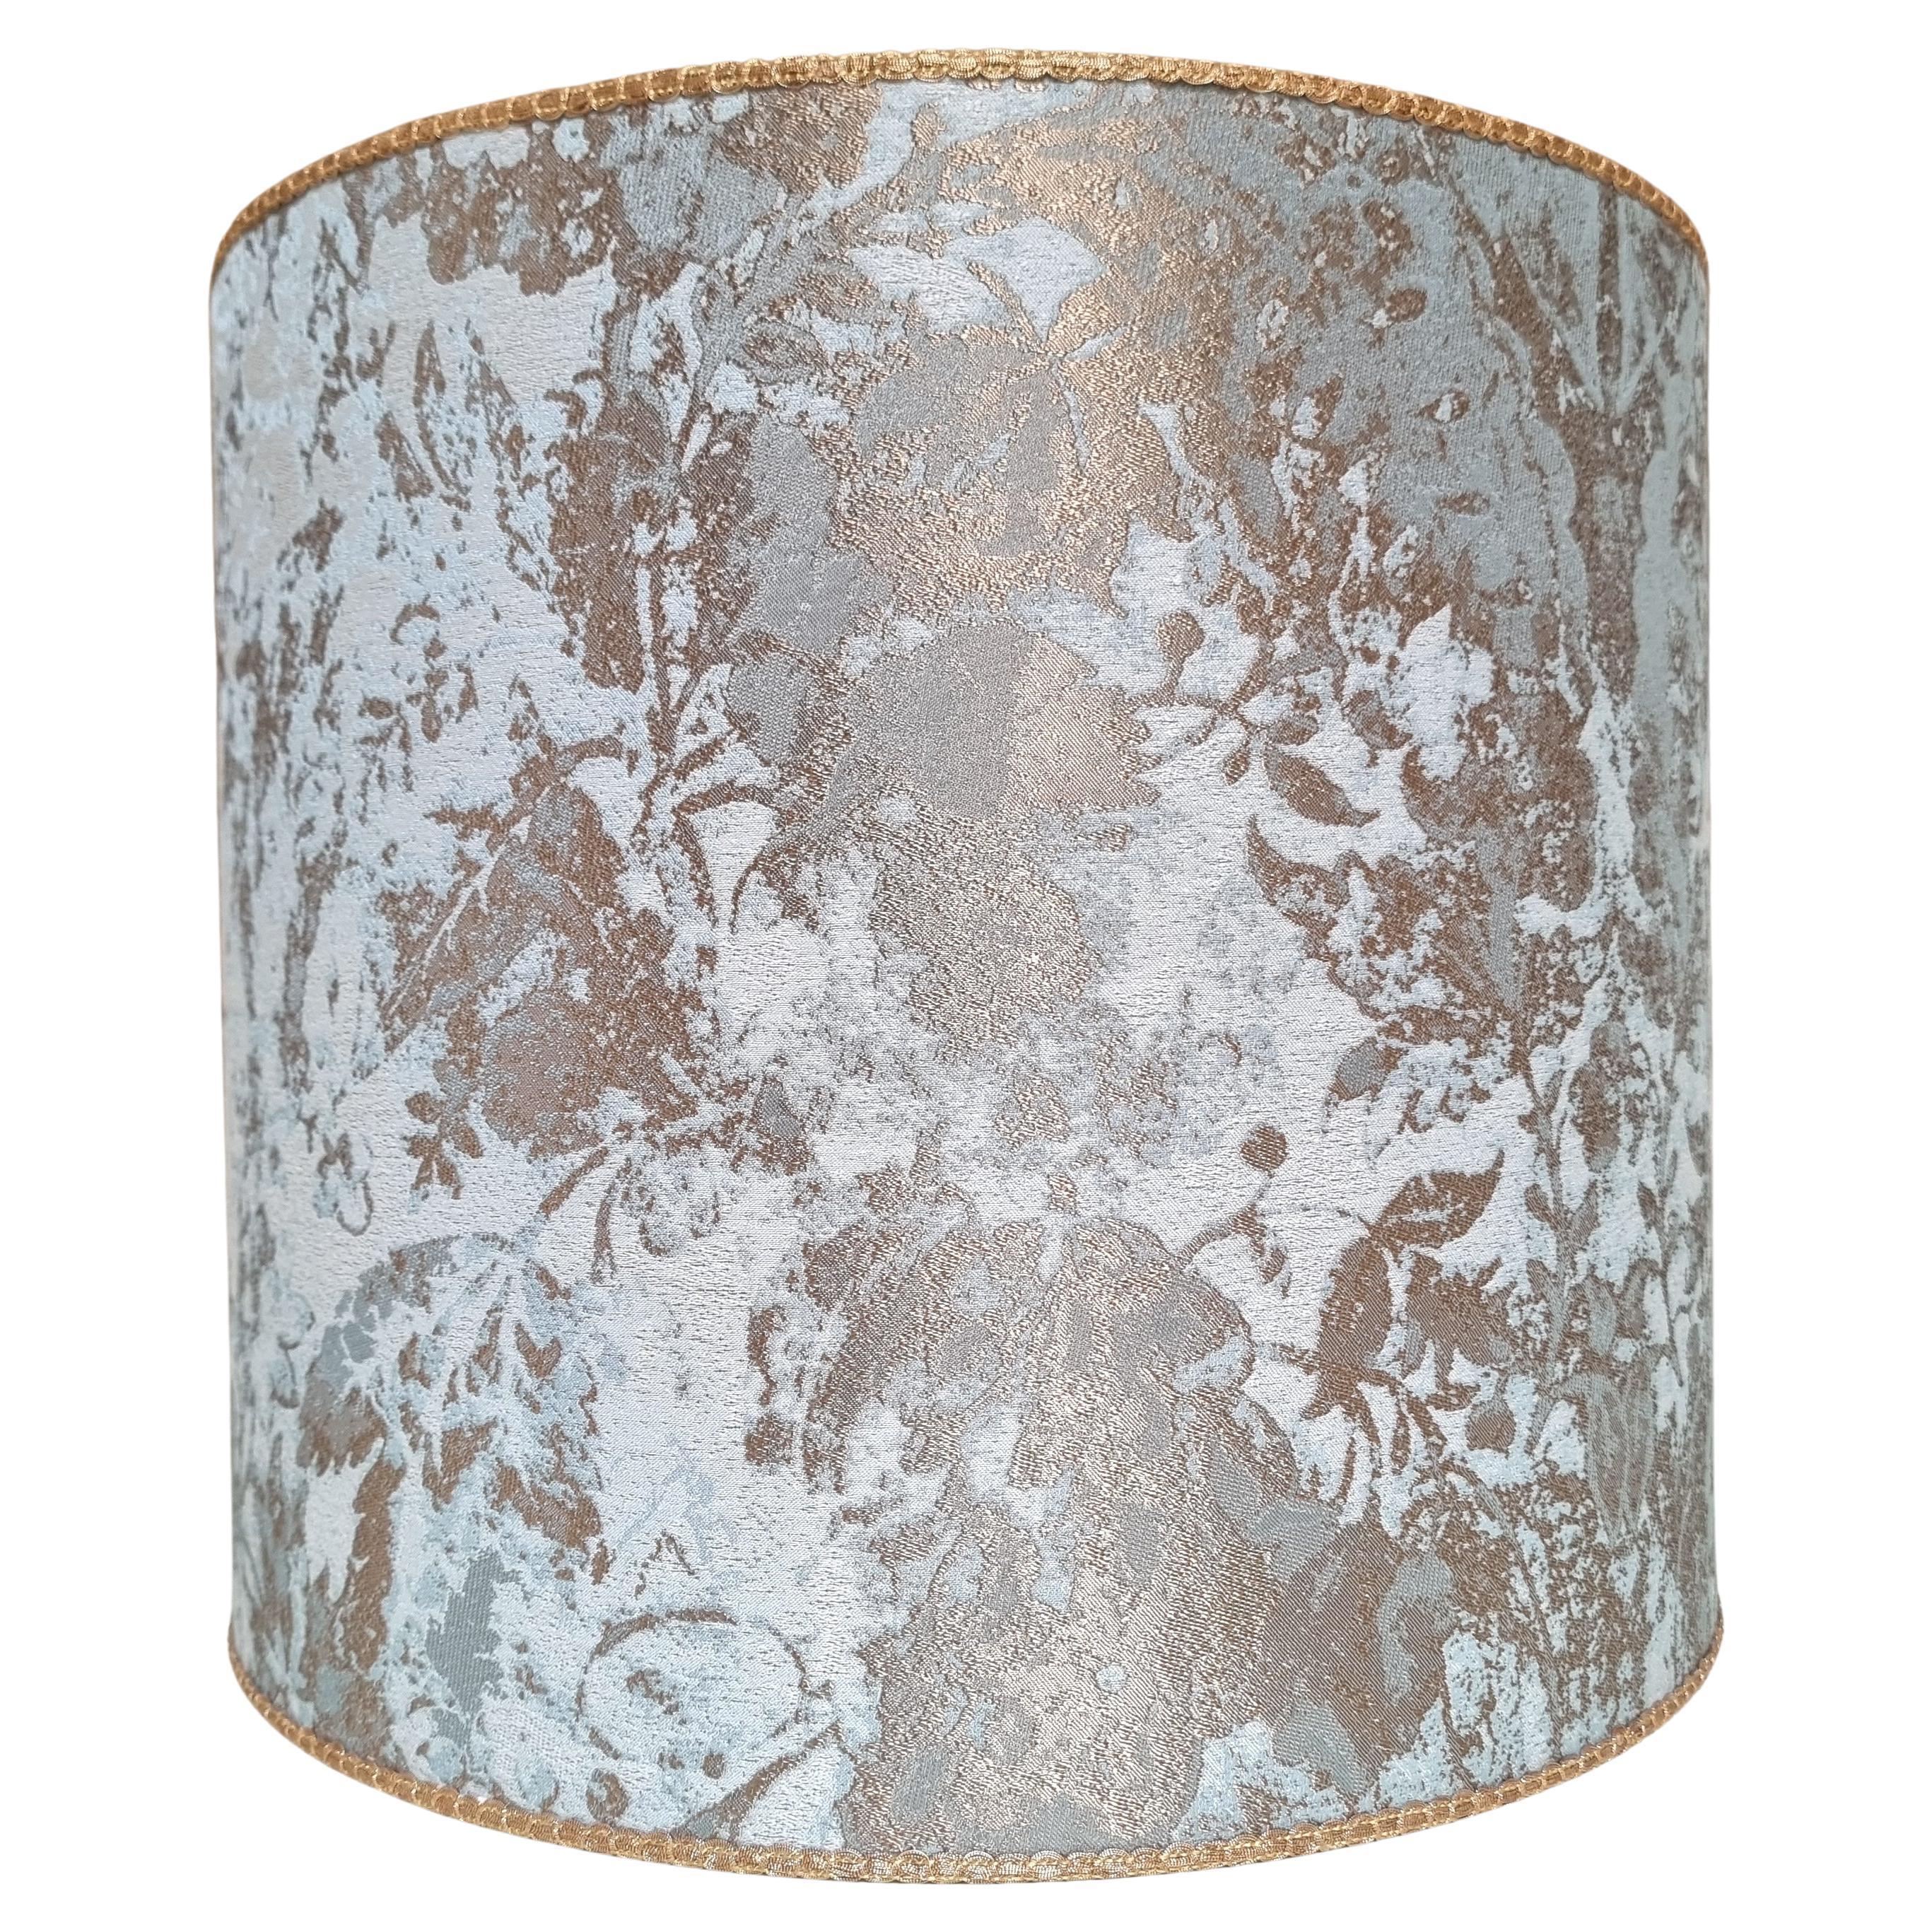 Hand-Crafted Drum Lampshade Rubelli Jacquard Fabric Aqua Blue Mirage Pattern For Sale